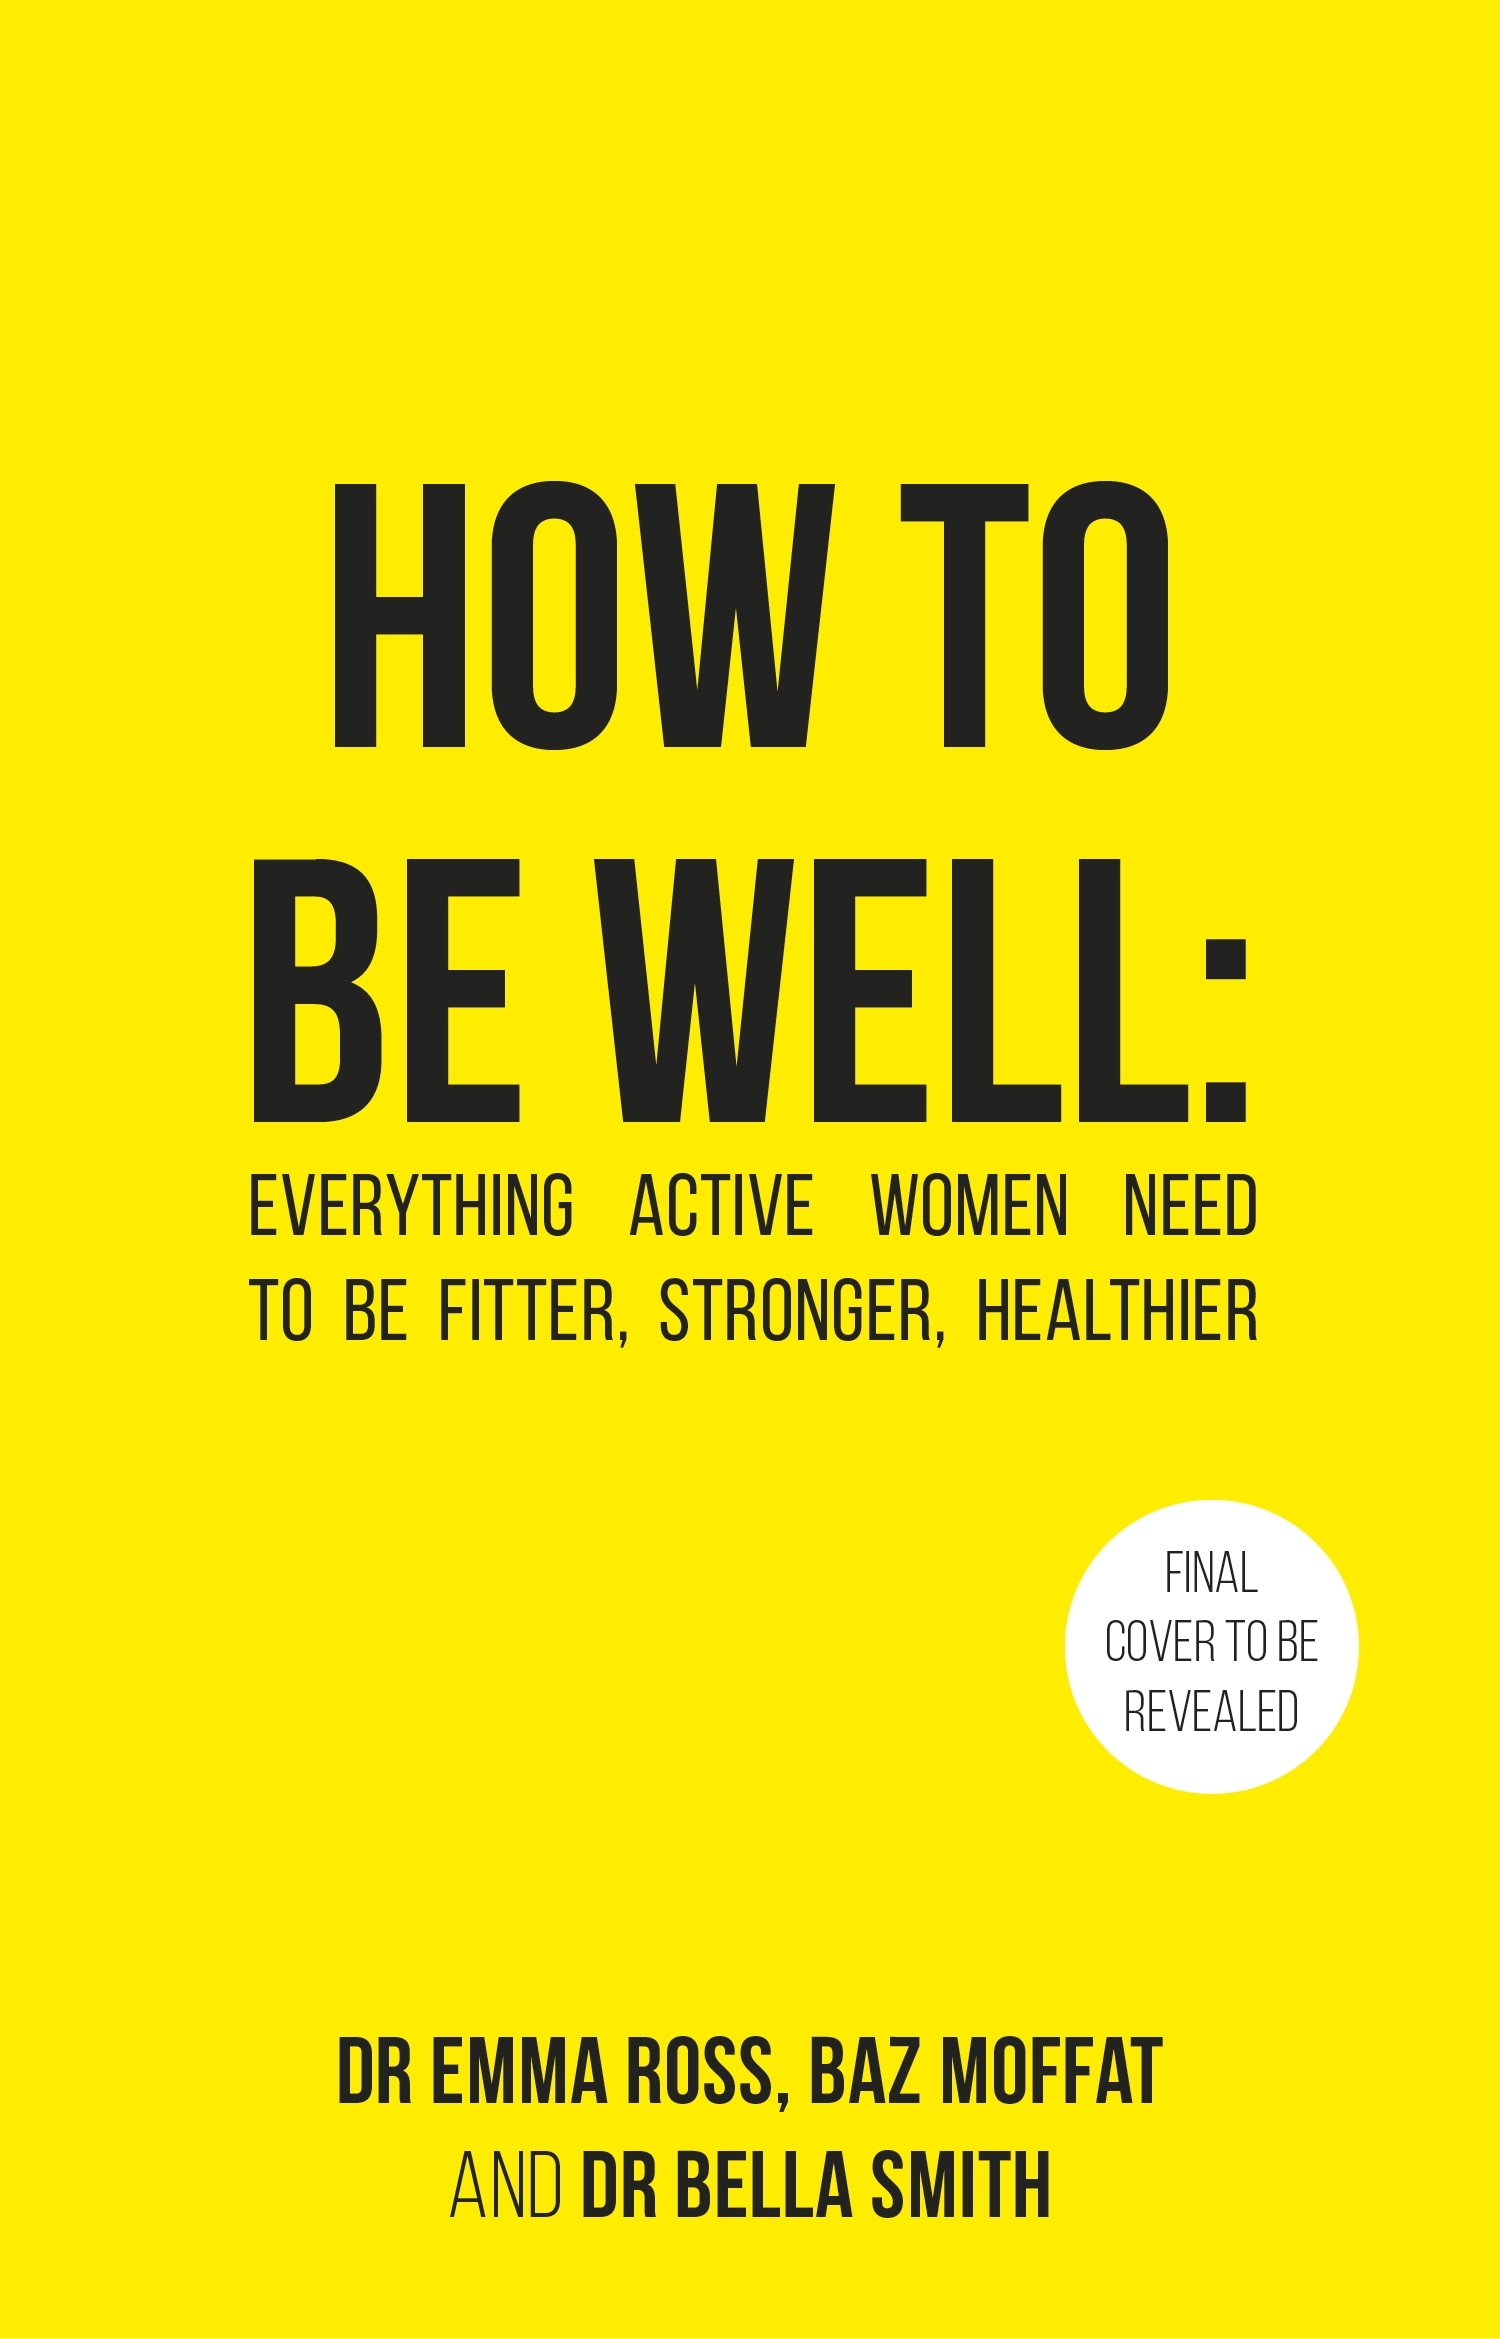 Book “How To Be Well” by Emma Ross — February 23, 2023